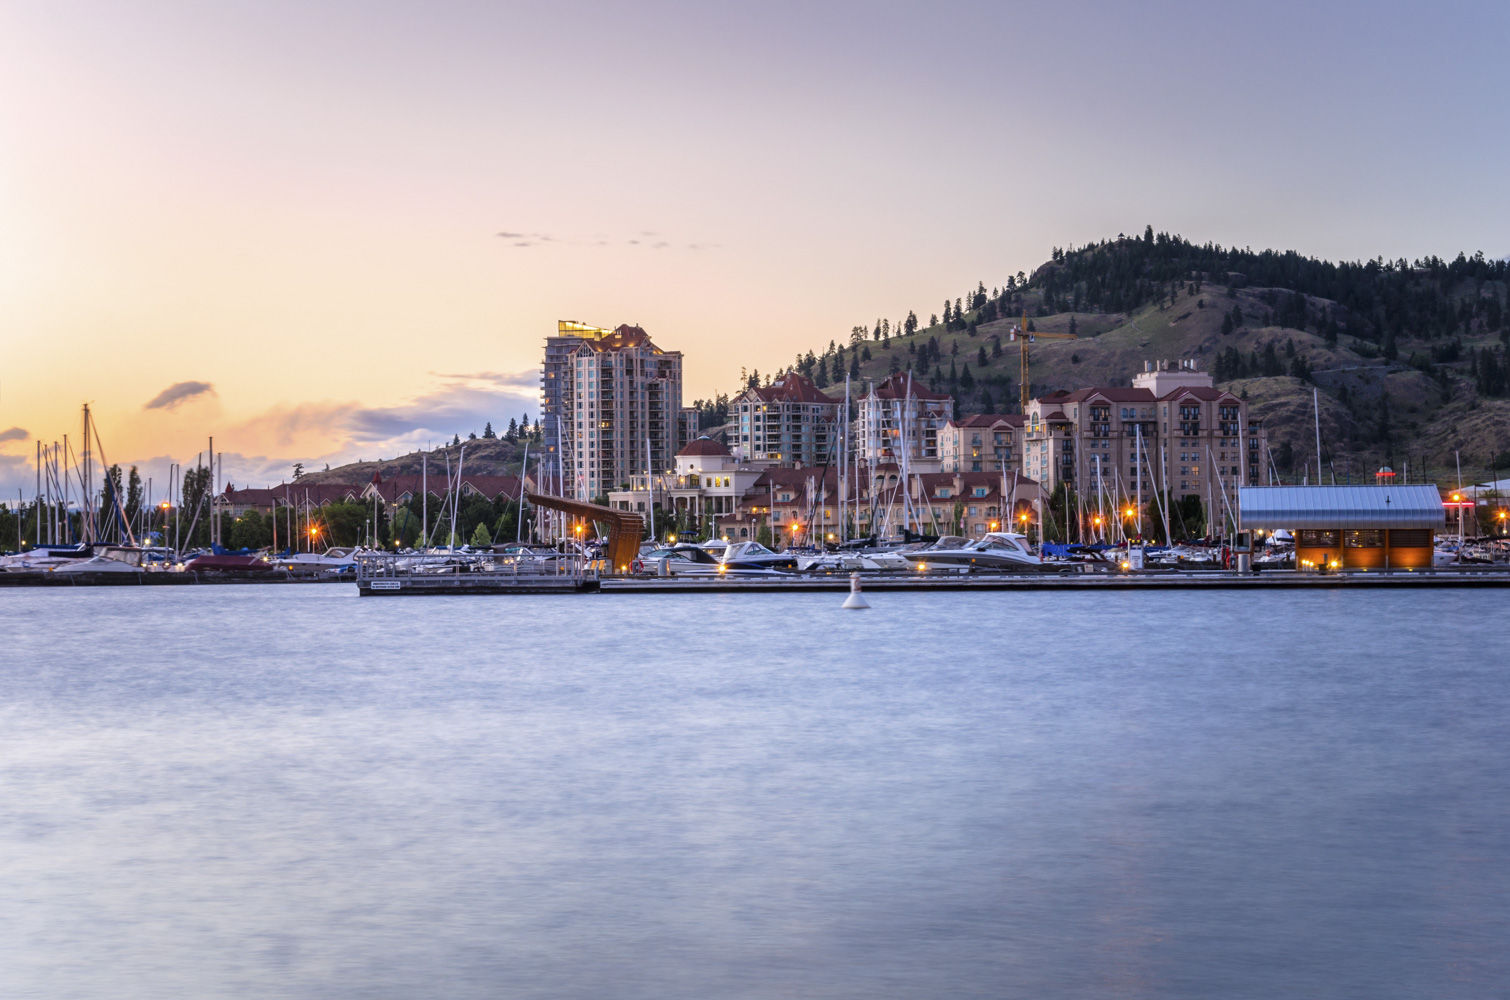 Enjoy a summer's evening from your Kelowna hotel by catching a concert or music festival downtown.